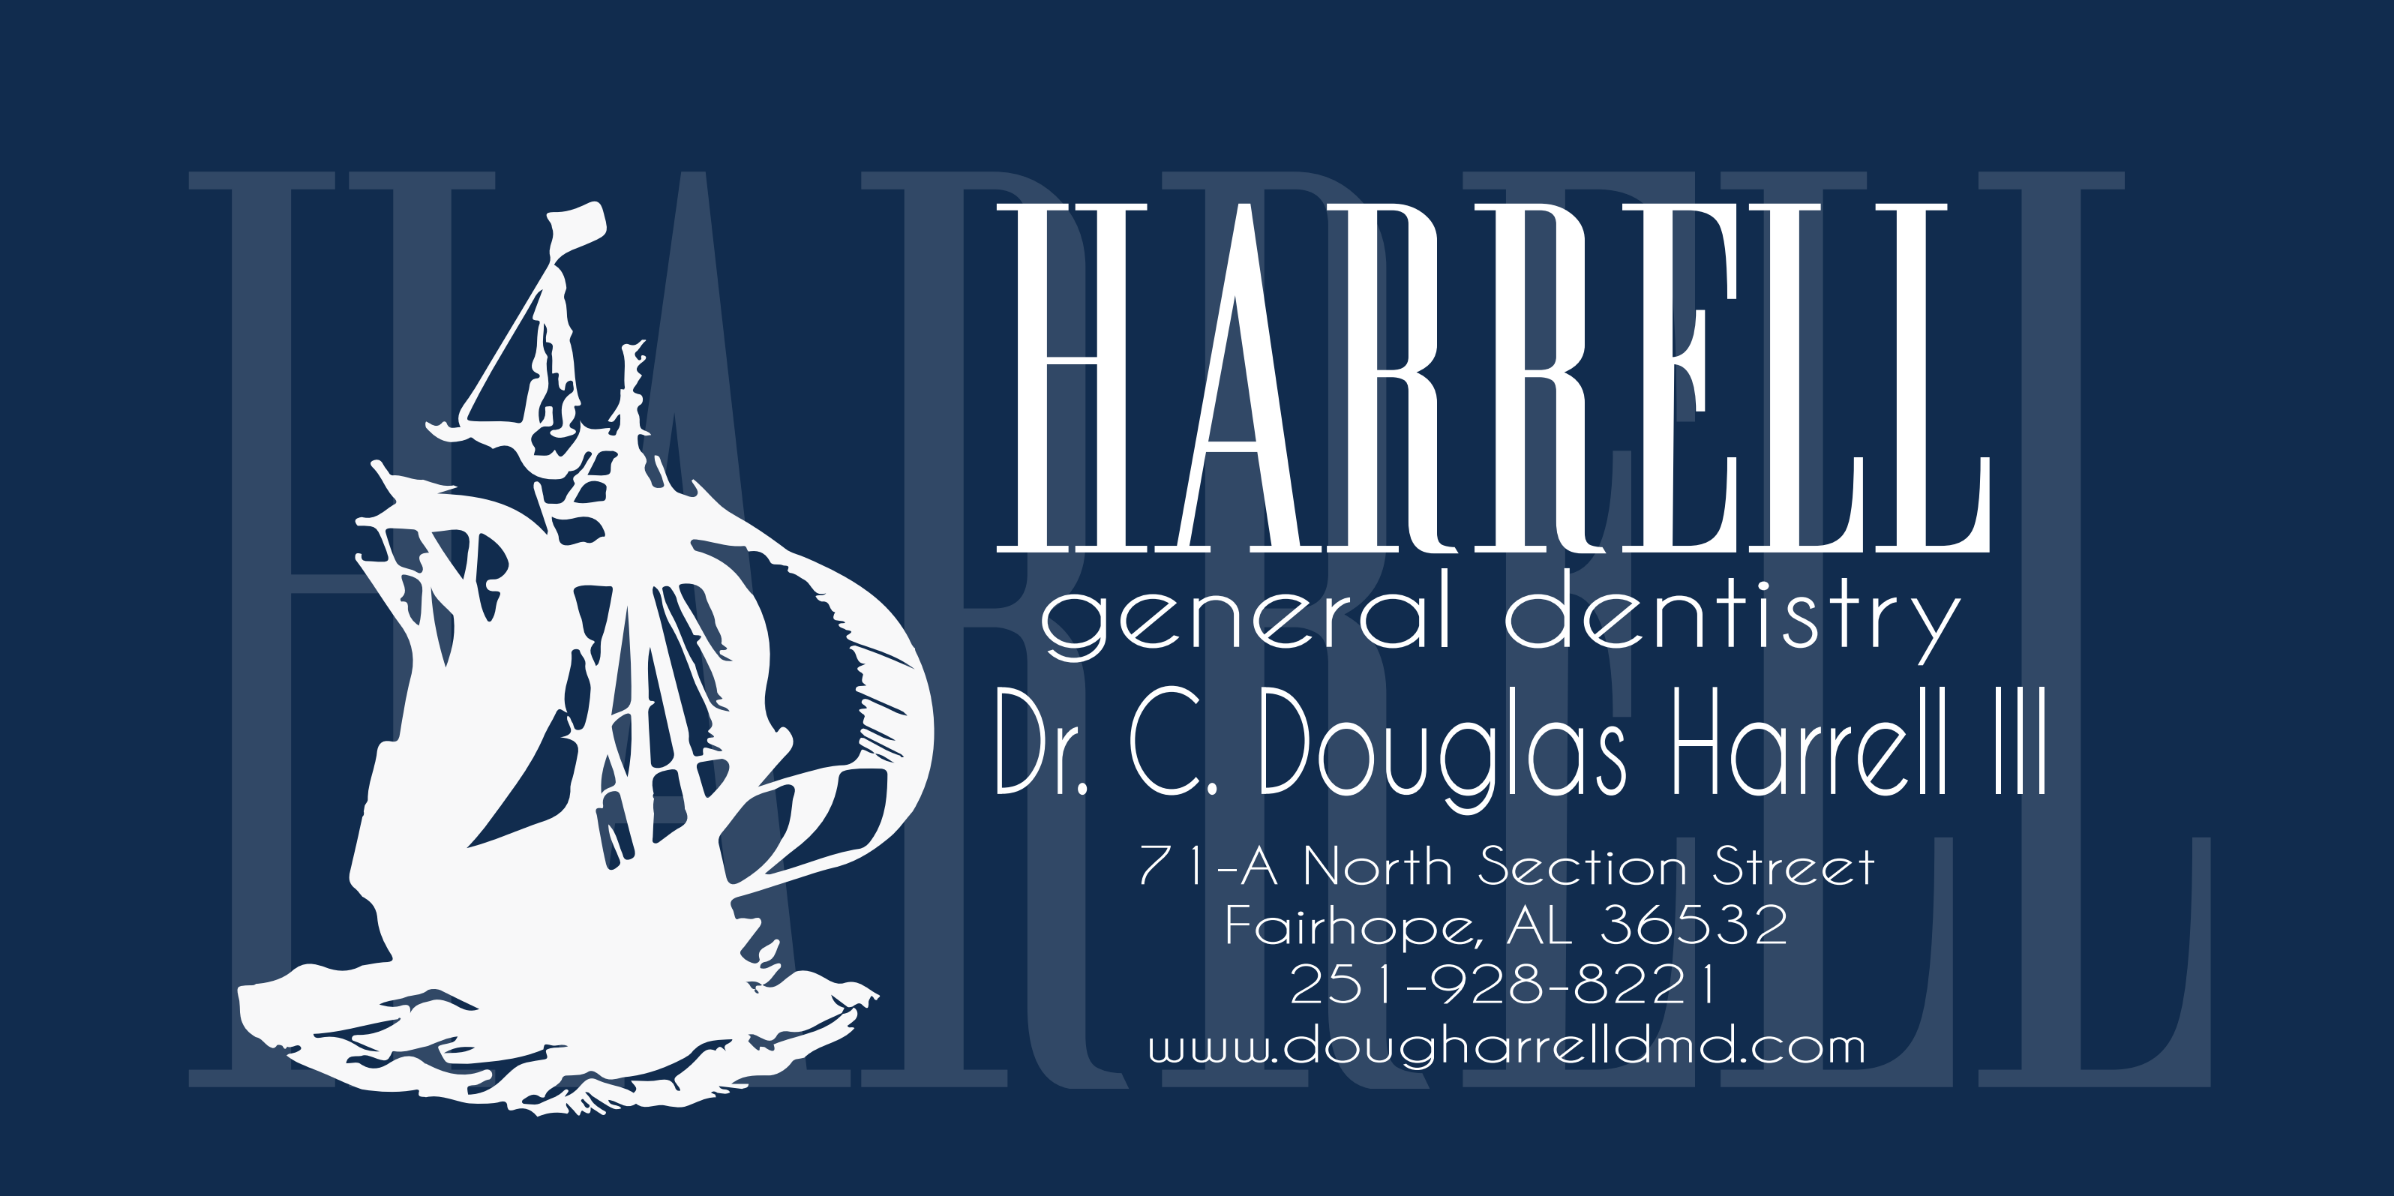 Thank you, Dr. Harrell!